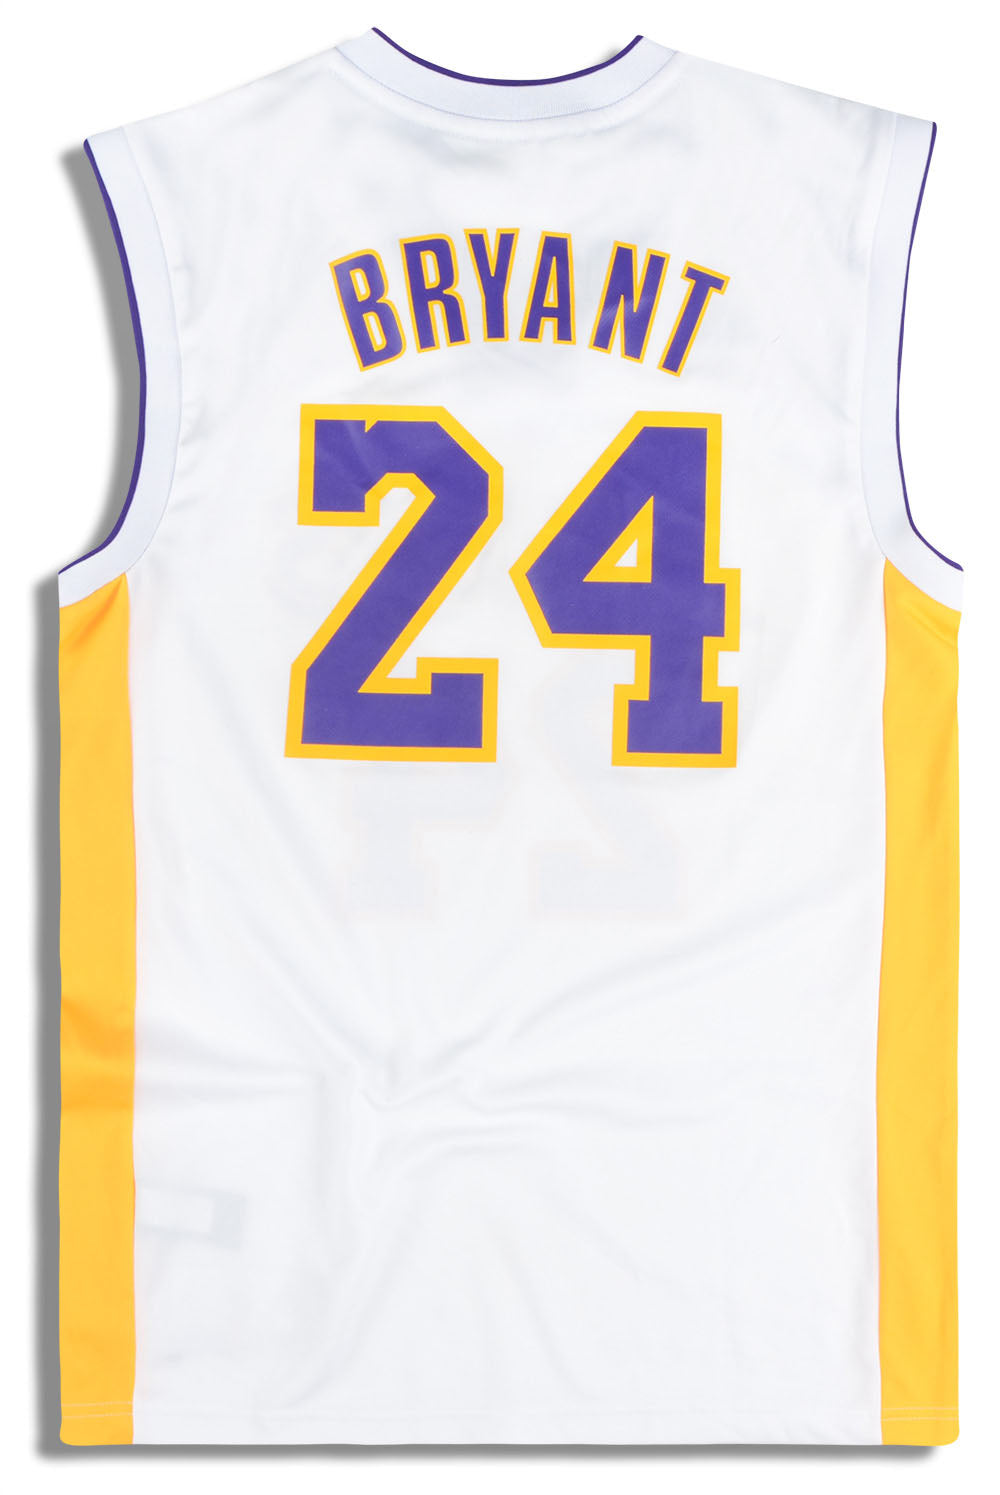 2010-14 LA LAKERS BRYANT #24 ADIDAS JERSEY (HOME) S - Classic